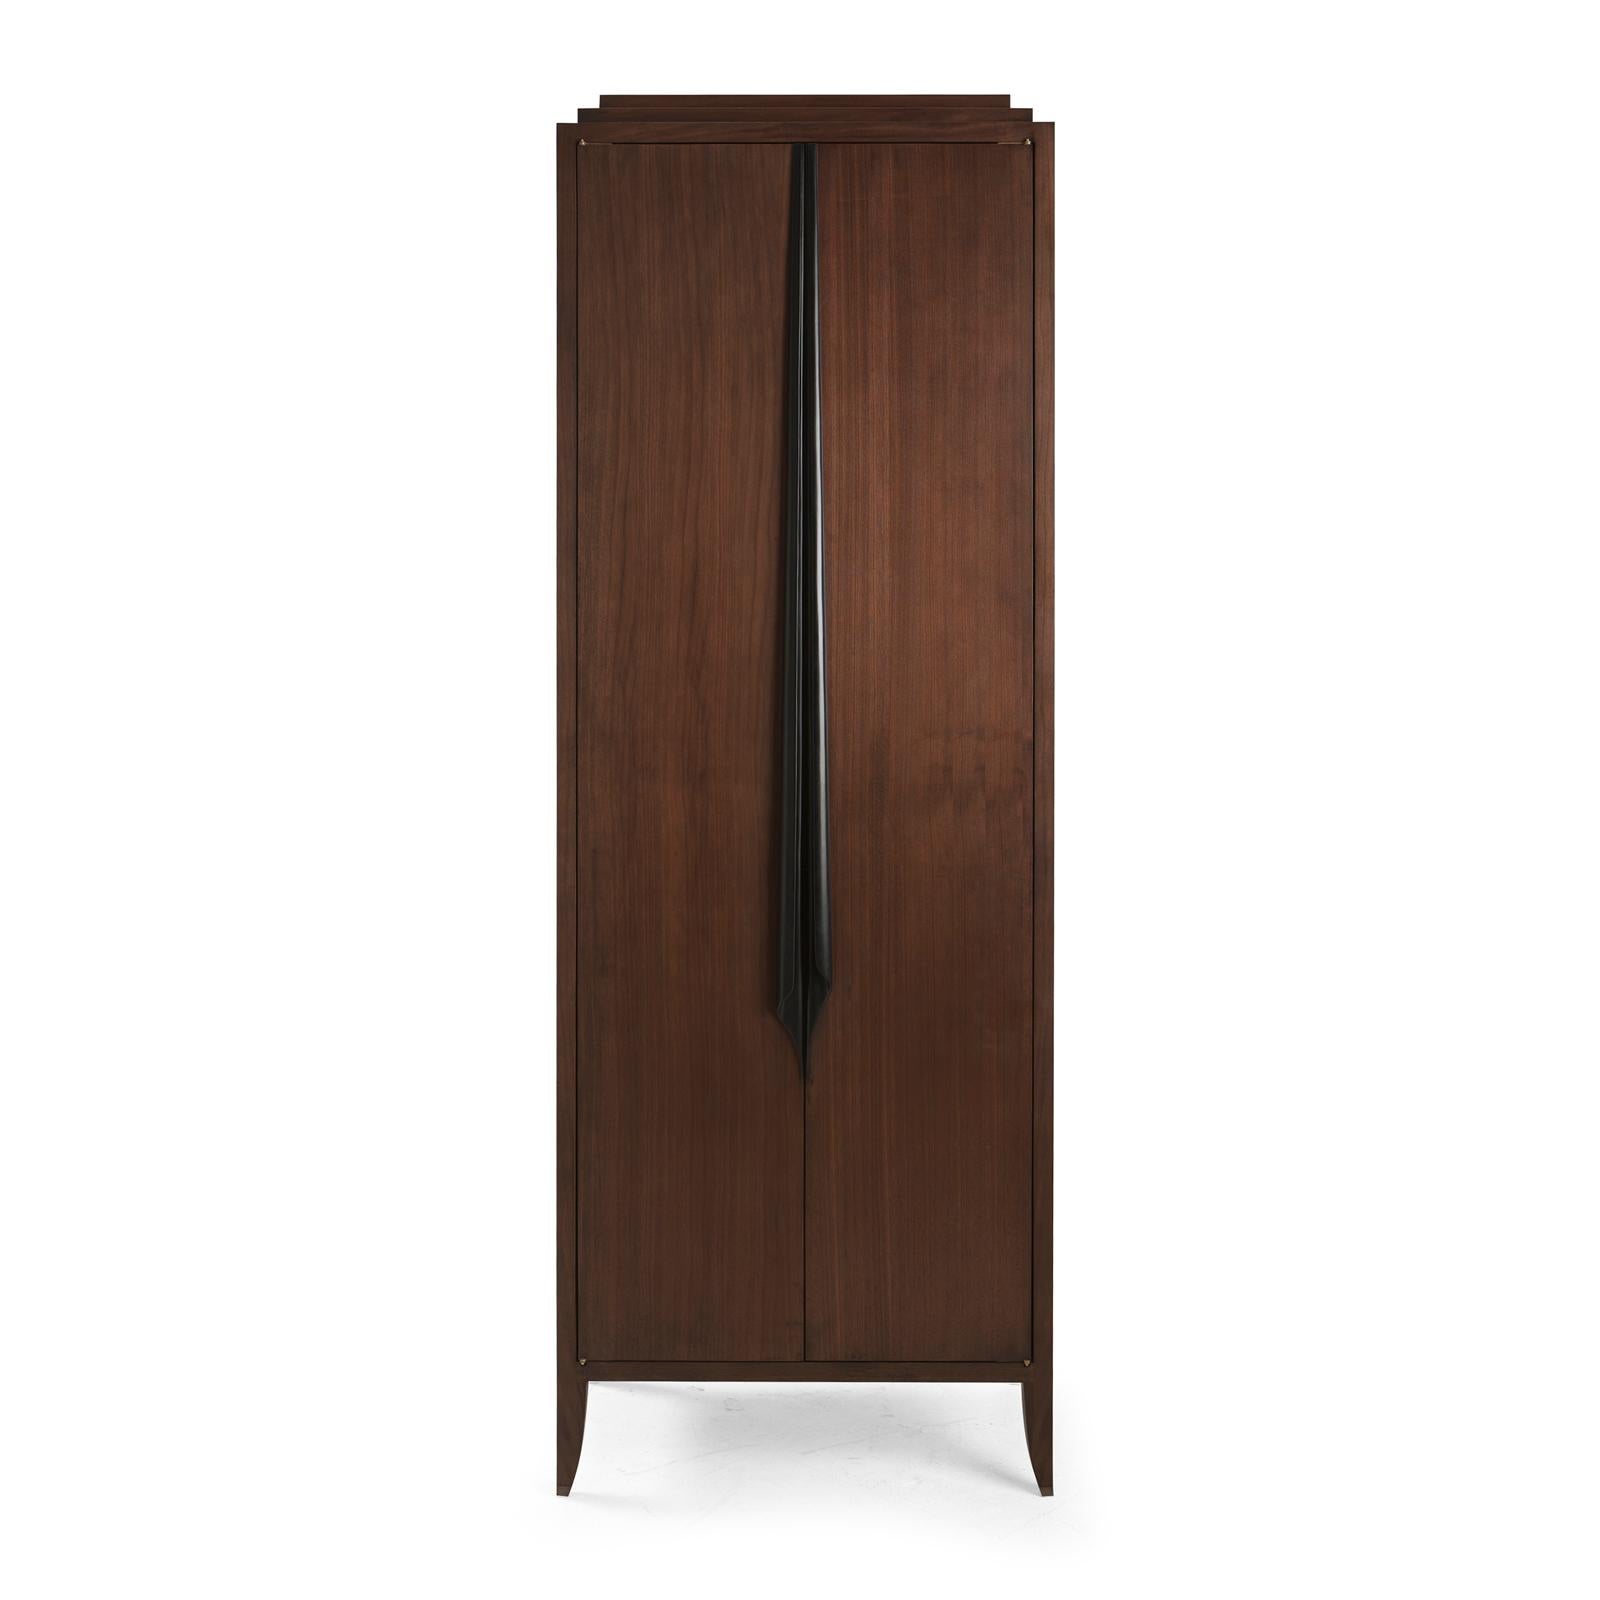 Cabinet Distinct Medium with all structure made in
solid mahogany wood. With three shelves and two
drawers. With two hand-carved wood handles.
Also available in Cabinet Large Distinct cabinet.